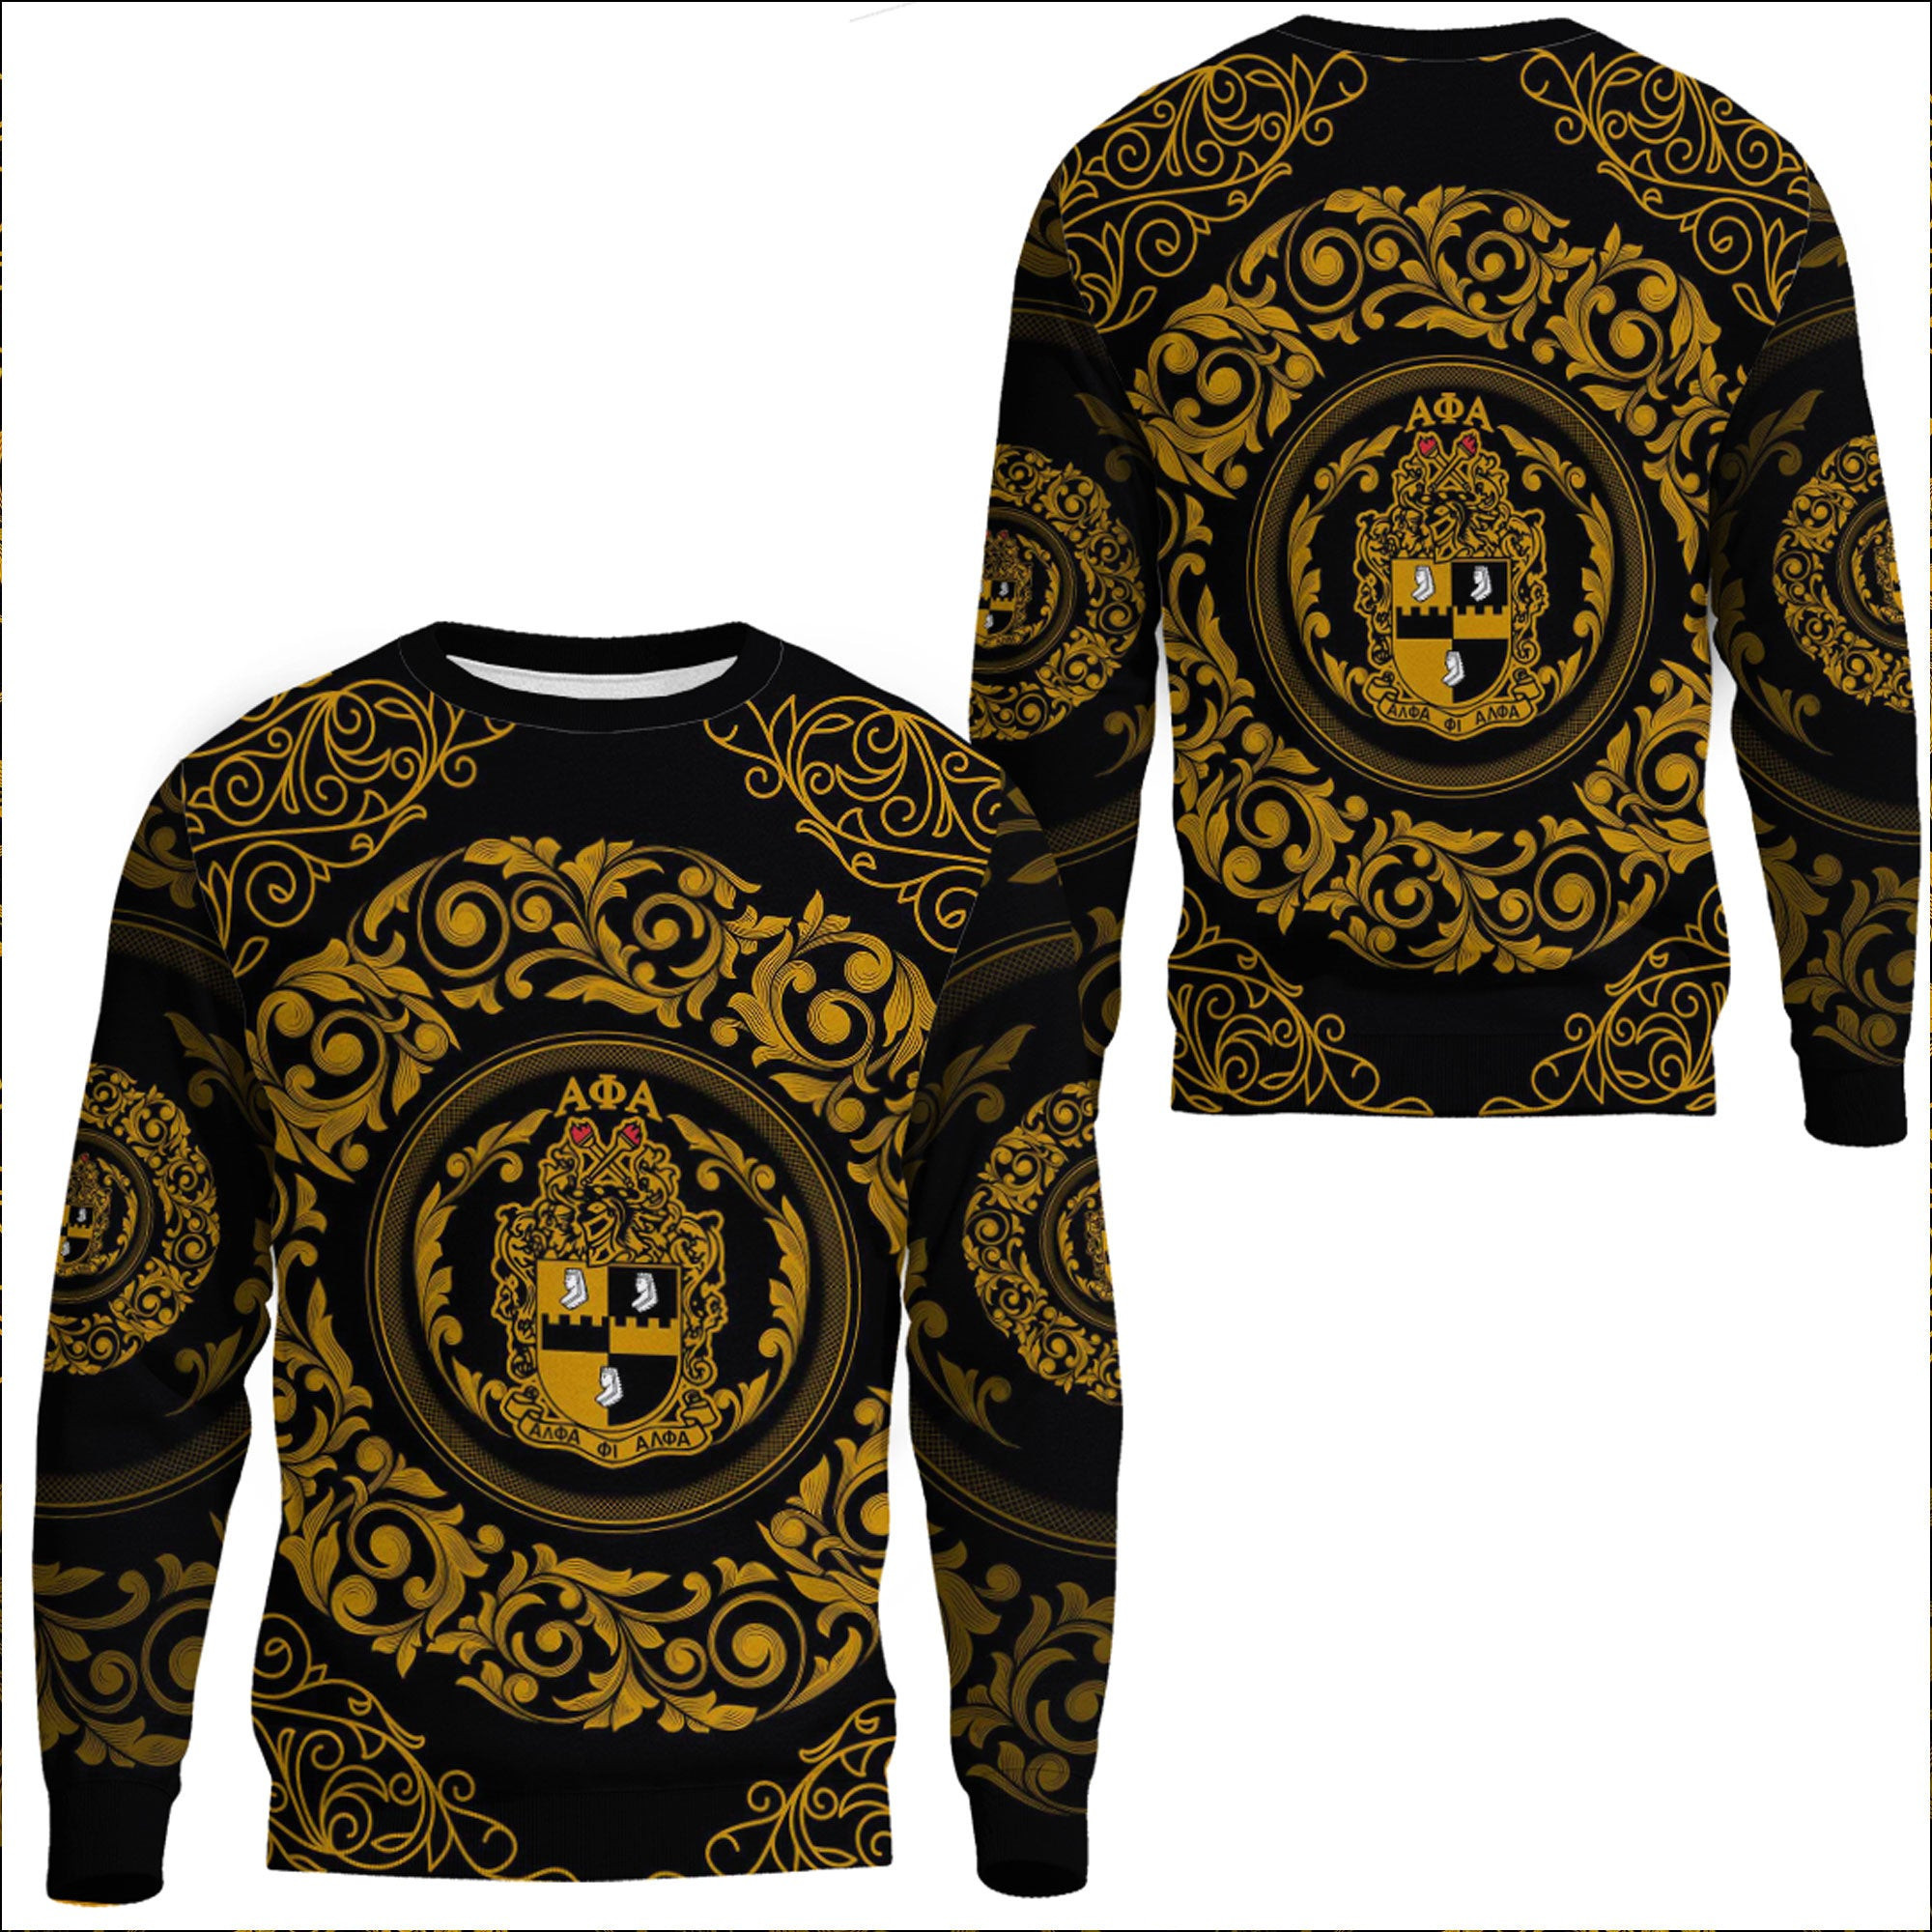 Africa Zone Clothing – Alpha Phi Alpha Fraternity Sweatshirts A35